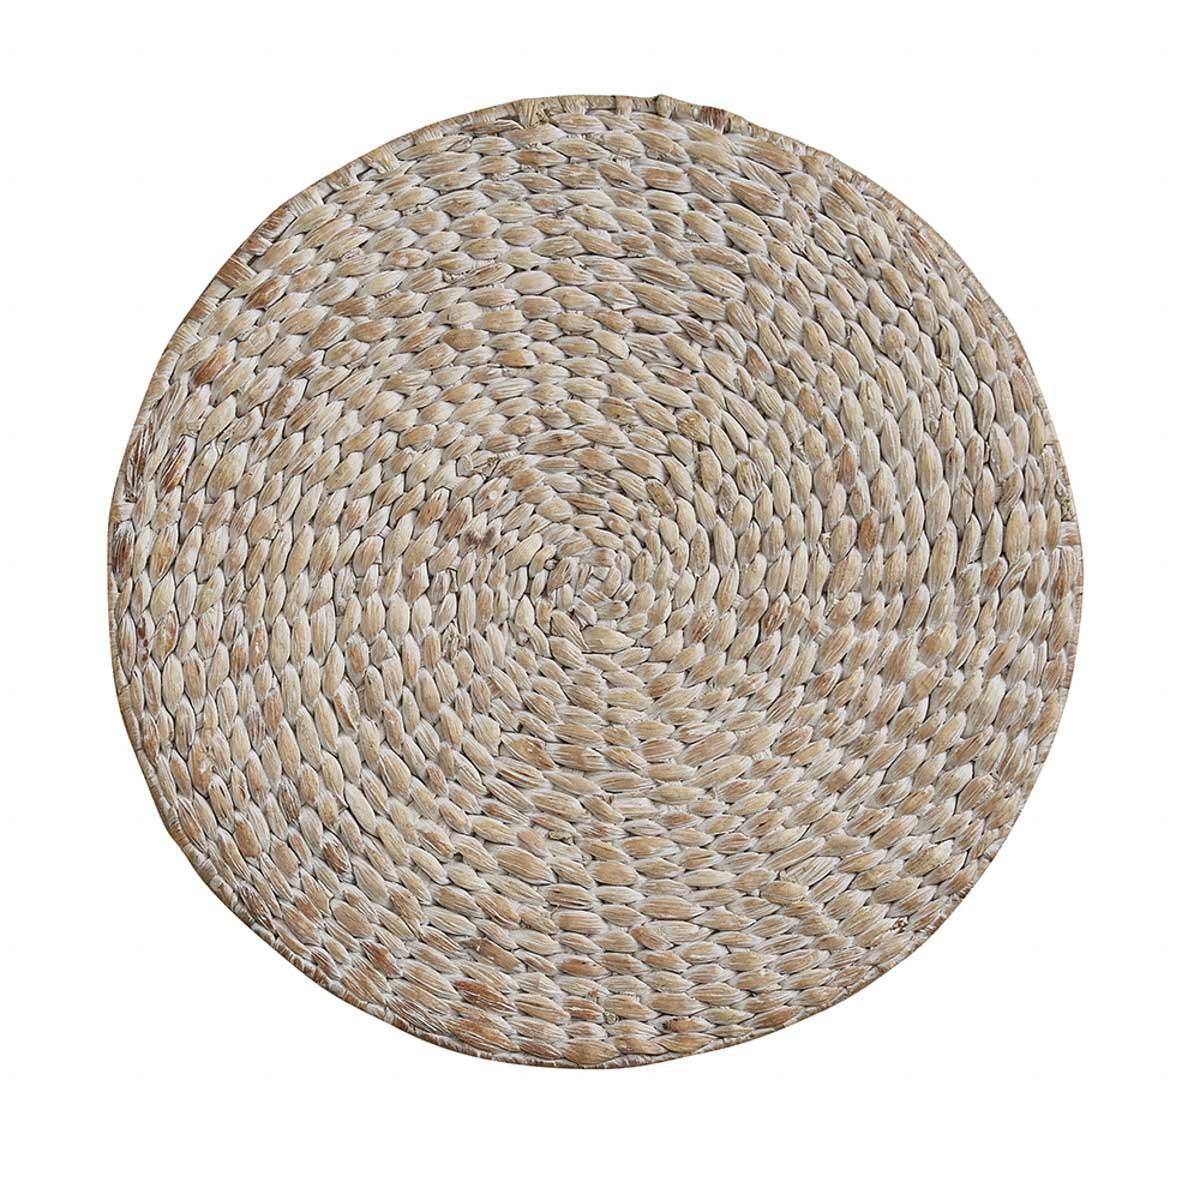 Park Design Braided Hyacinth Round Placemat (White)